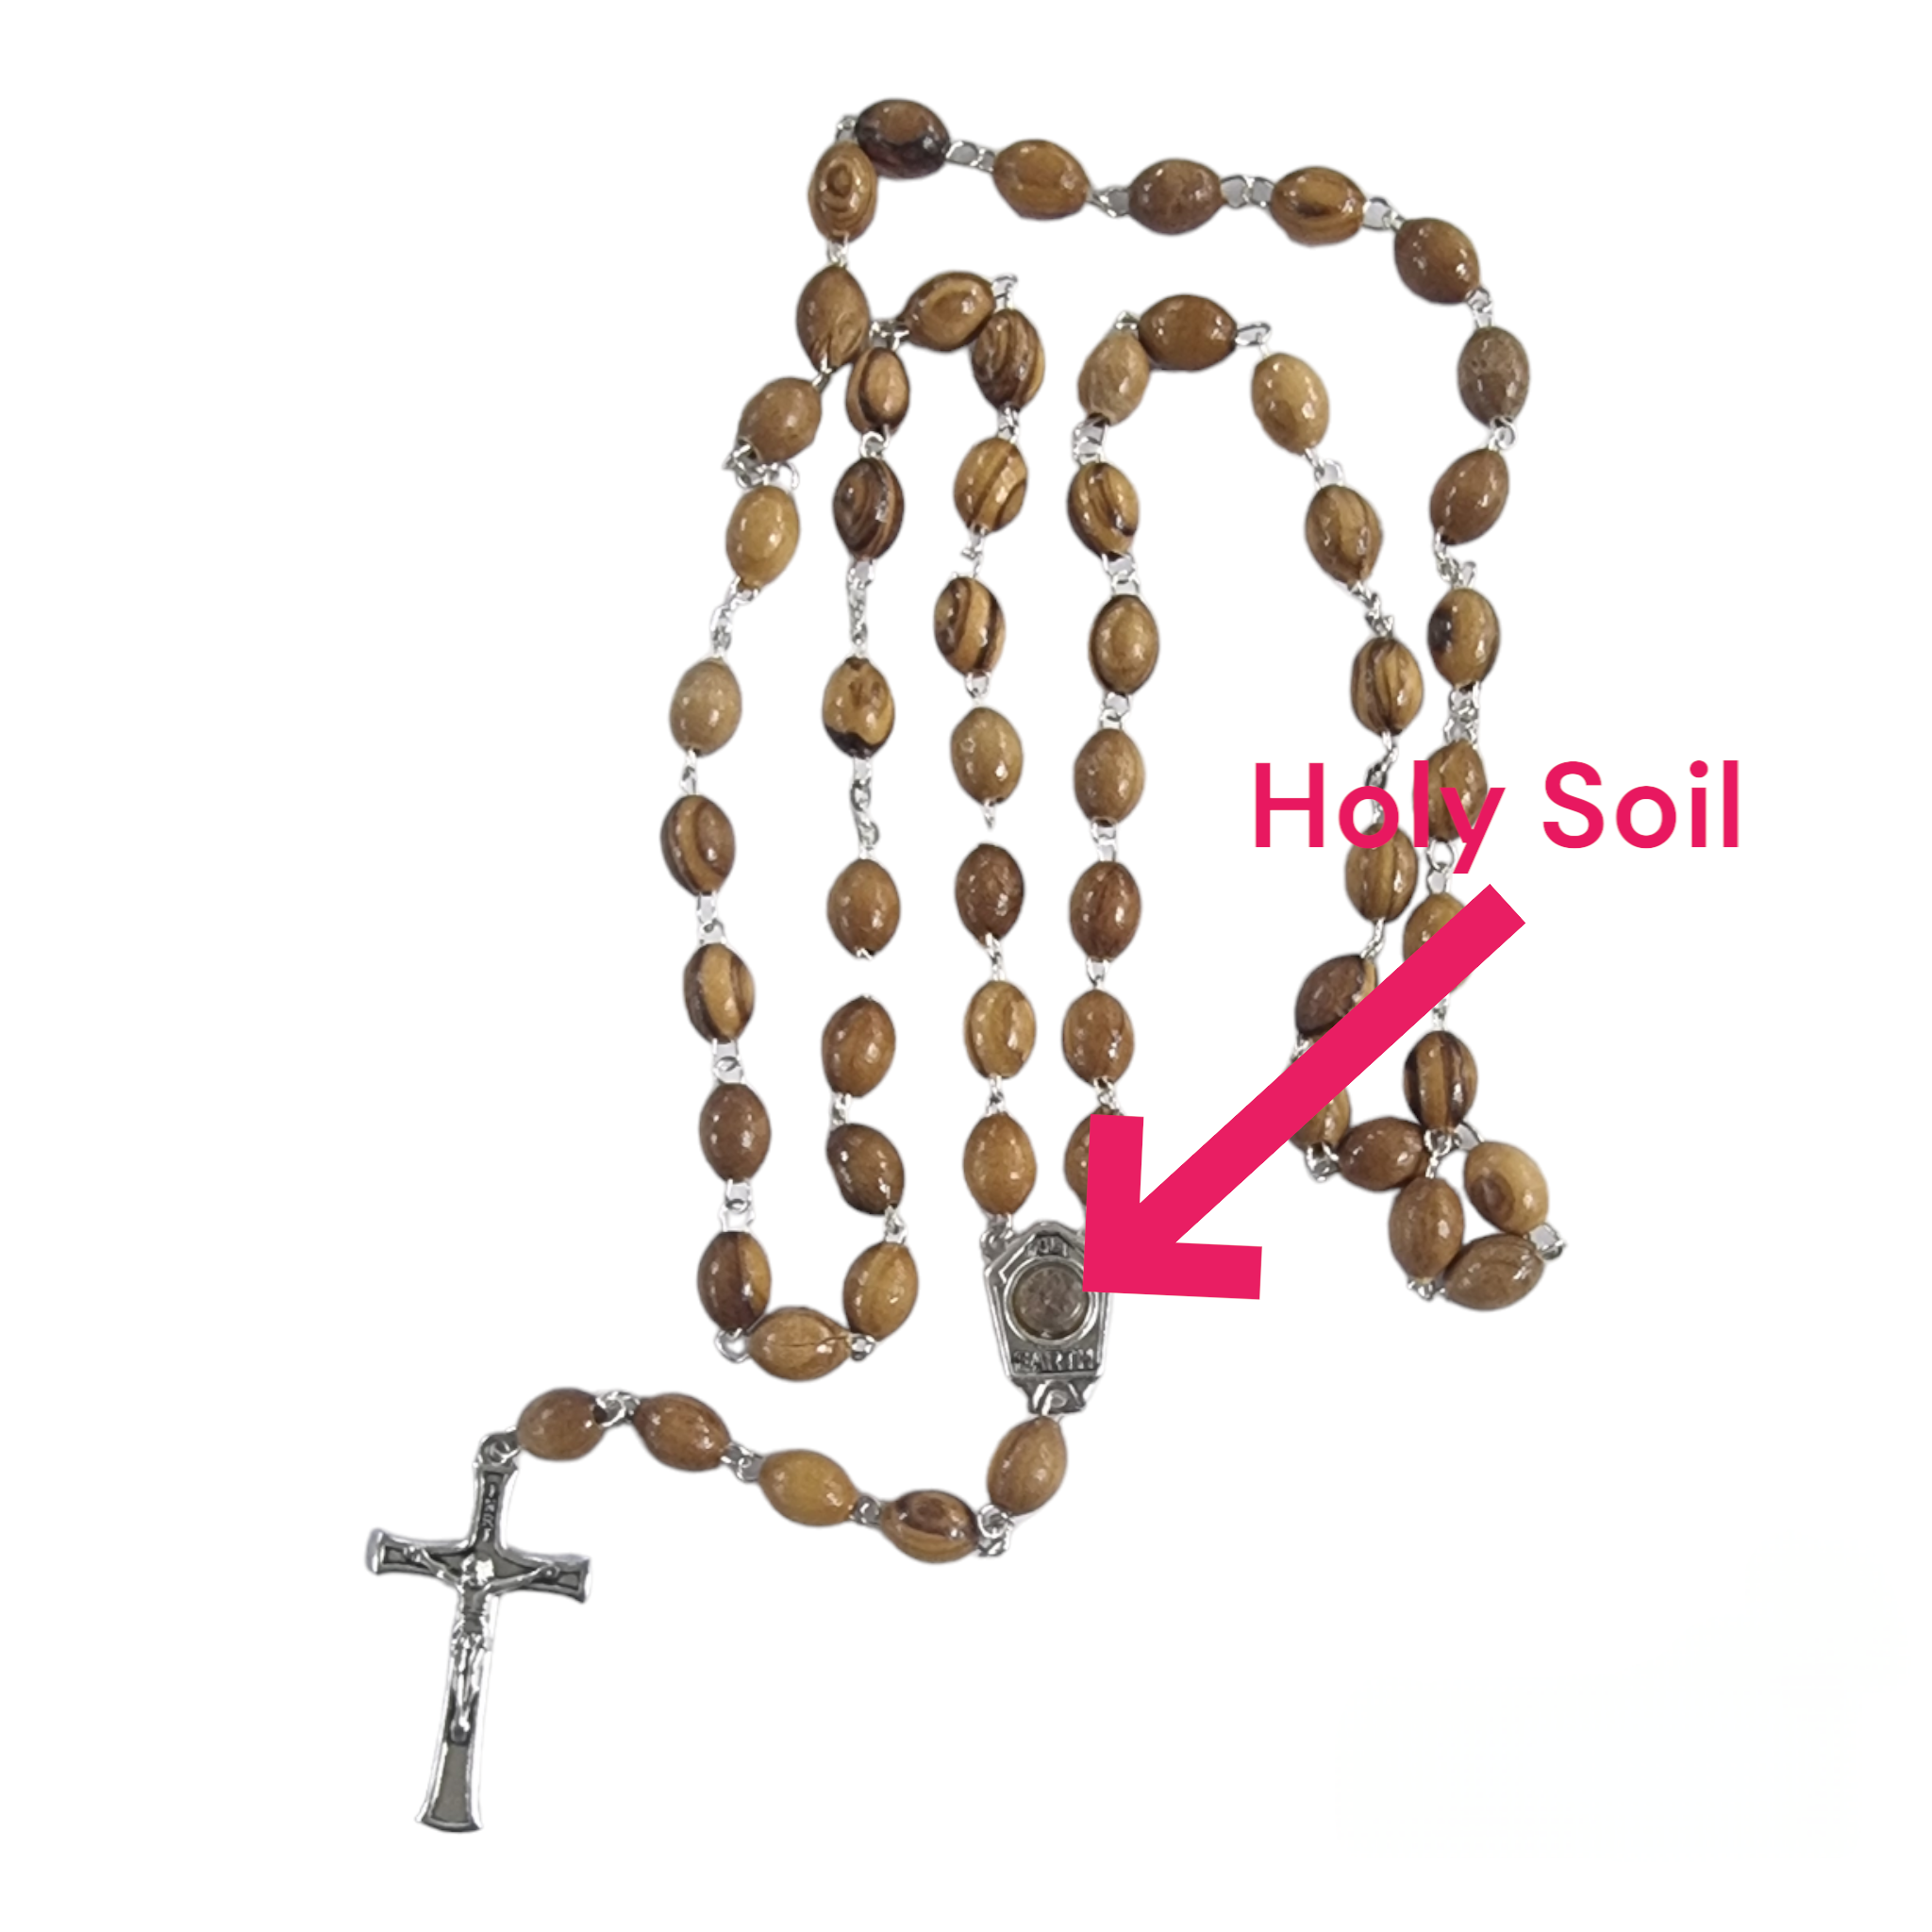 "Divine Connection:  Olive Wood Rosary"